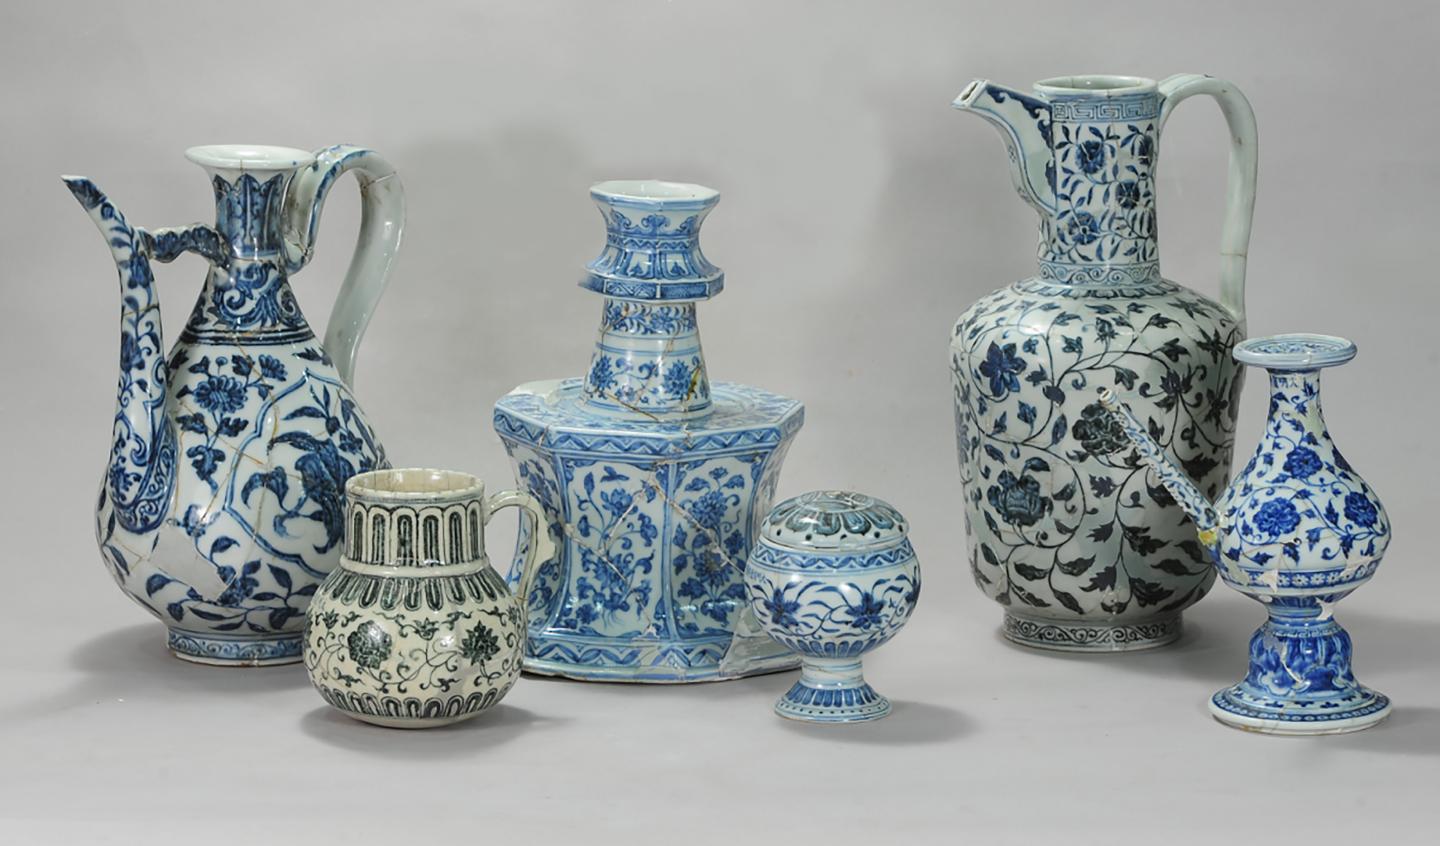 Xuande blue-and-white porcelain excavated in Jingdezhen, China.